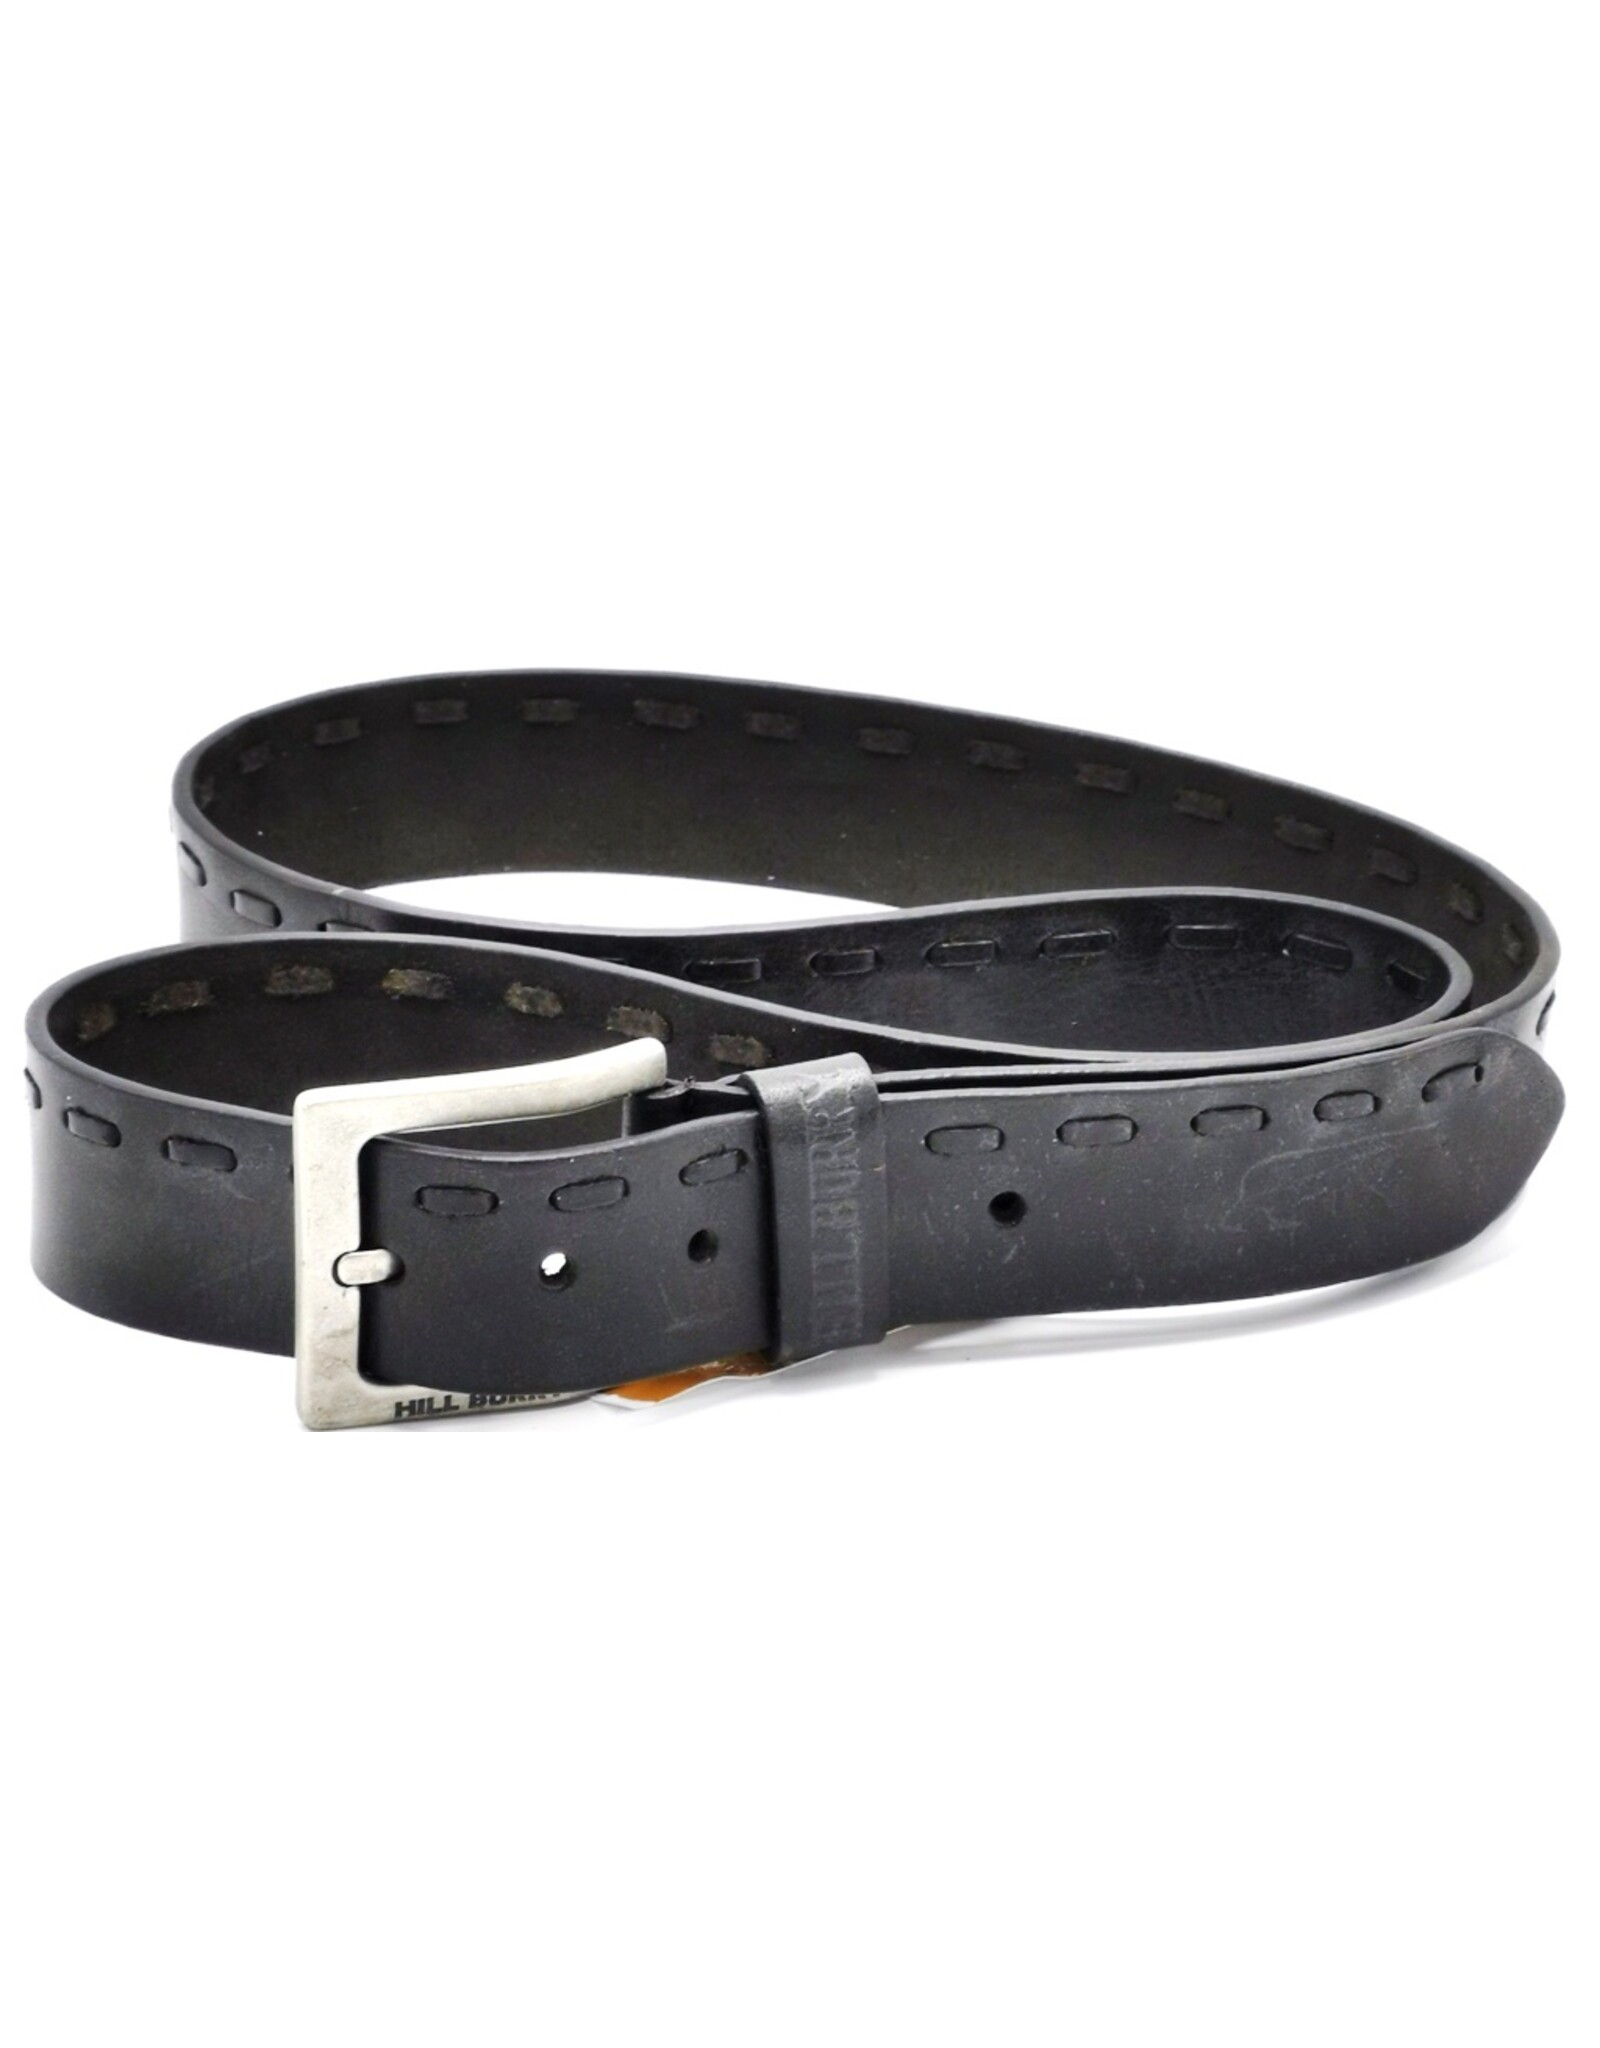 HillBurry Leather belts -  HillBurry Leather belt black, solid leather